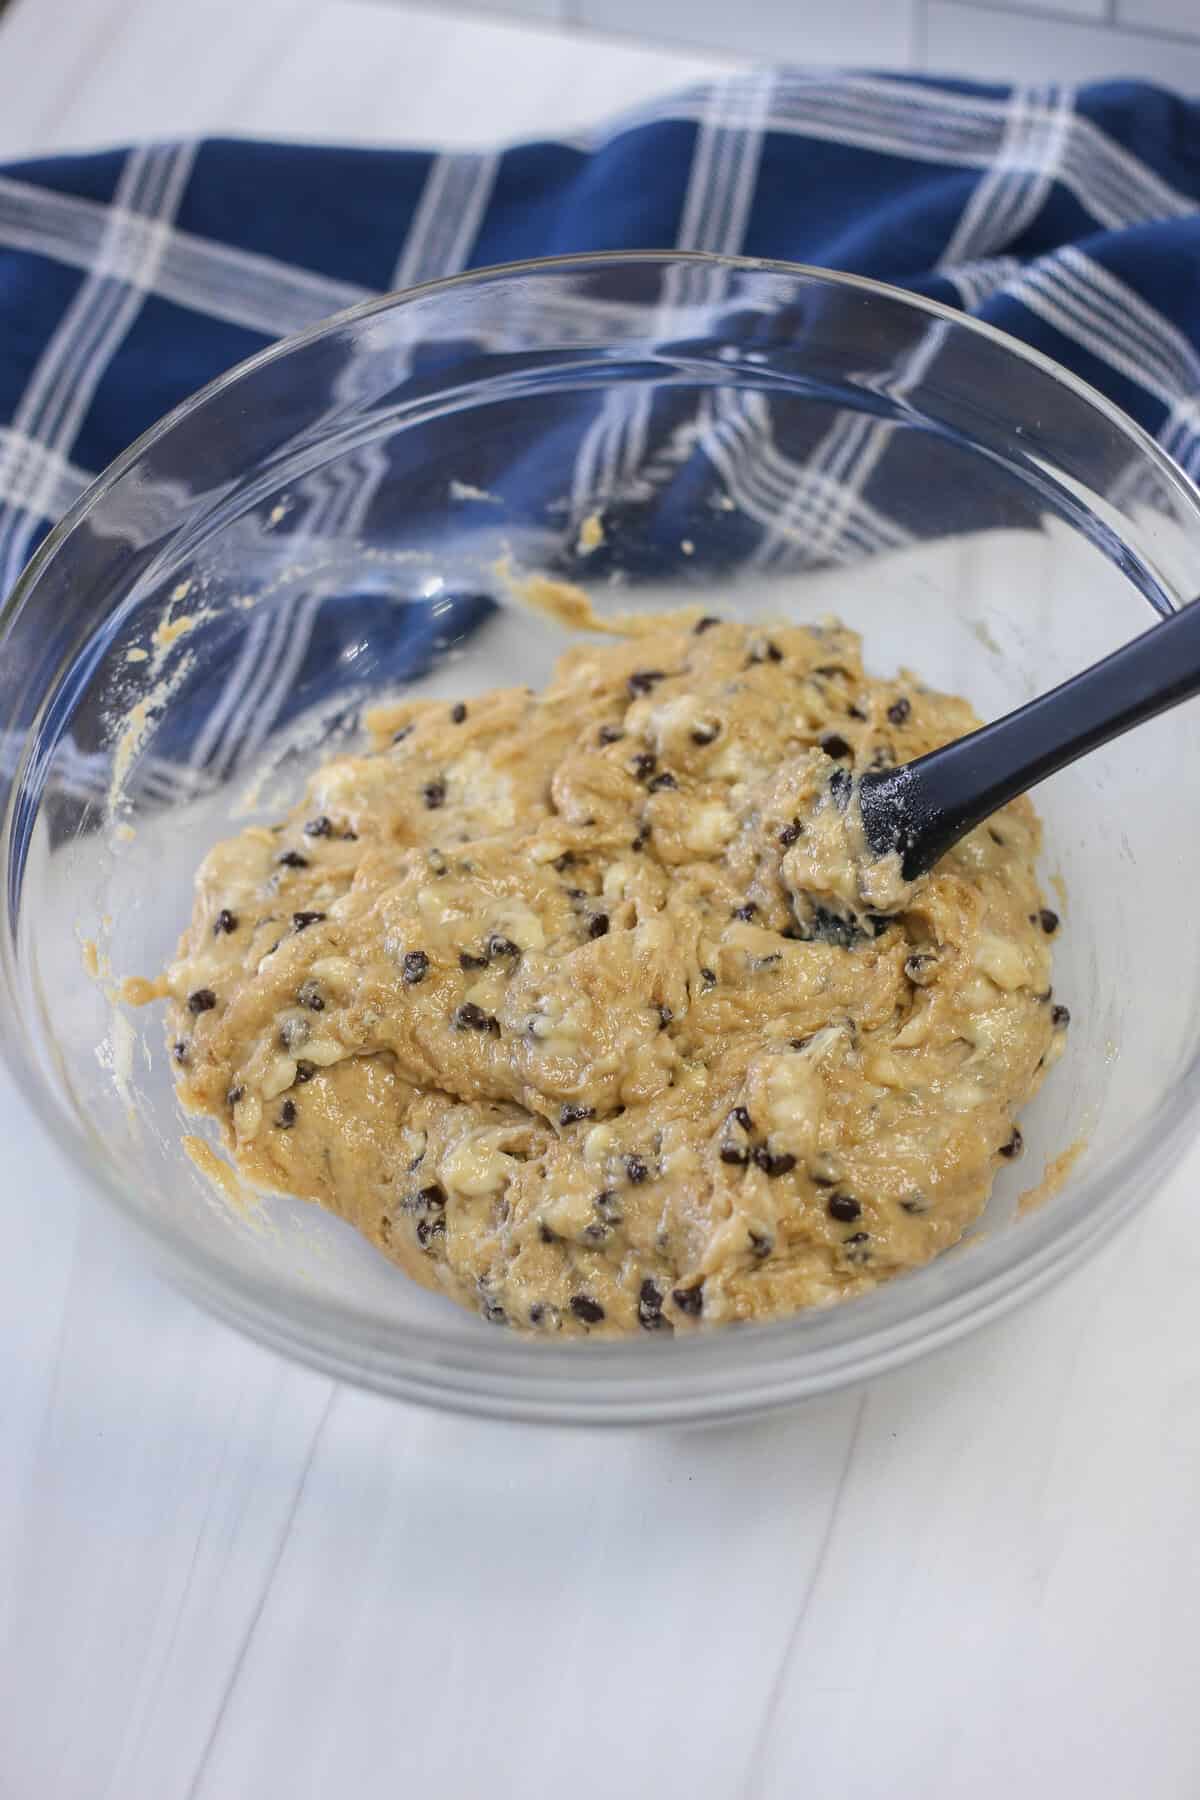 Banana chocolate chip muffin batter in a glass bowl.